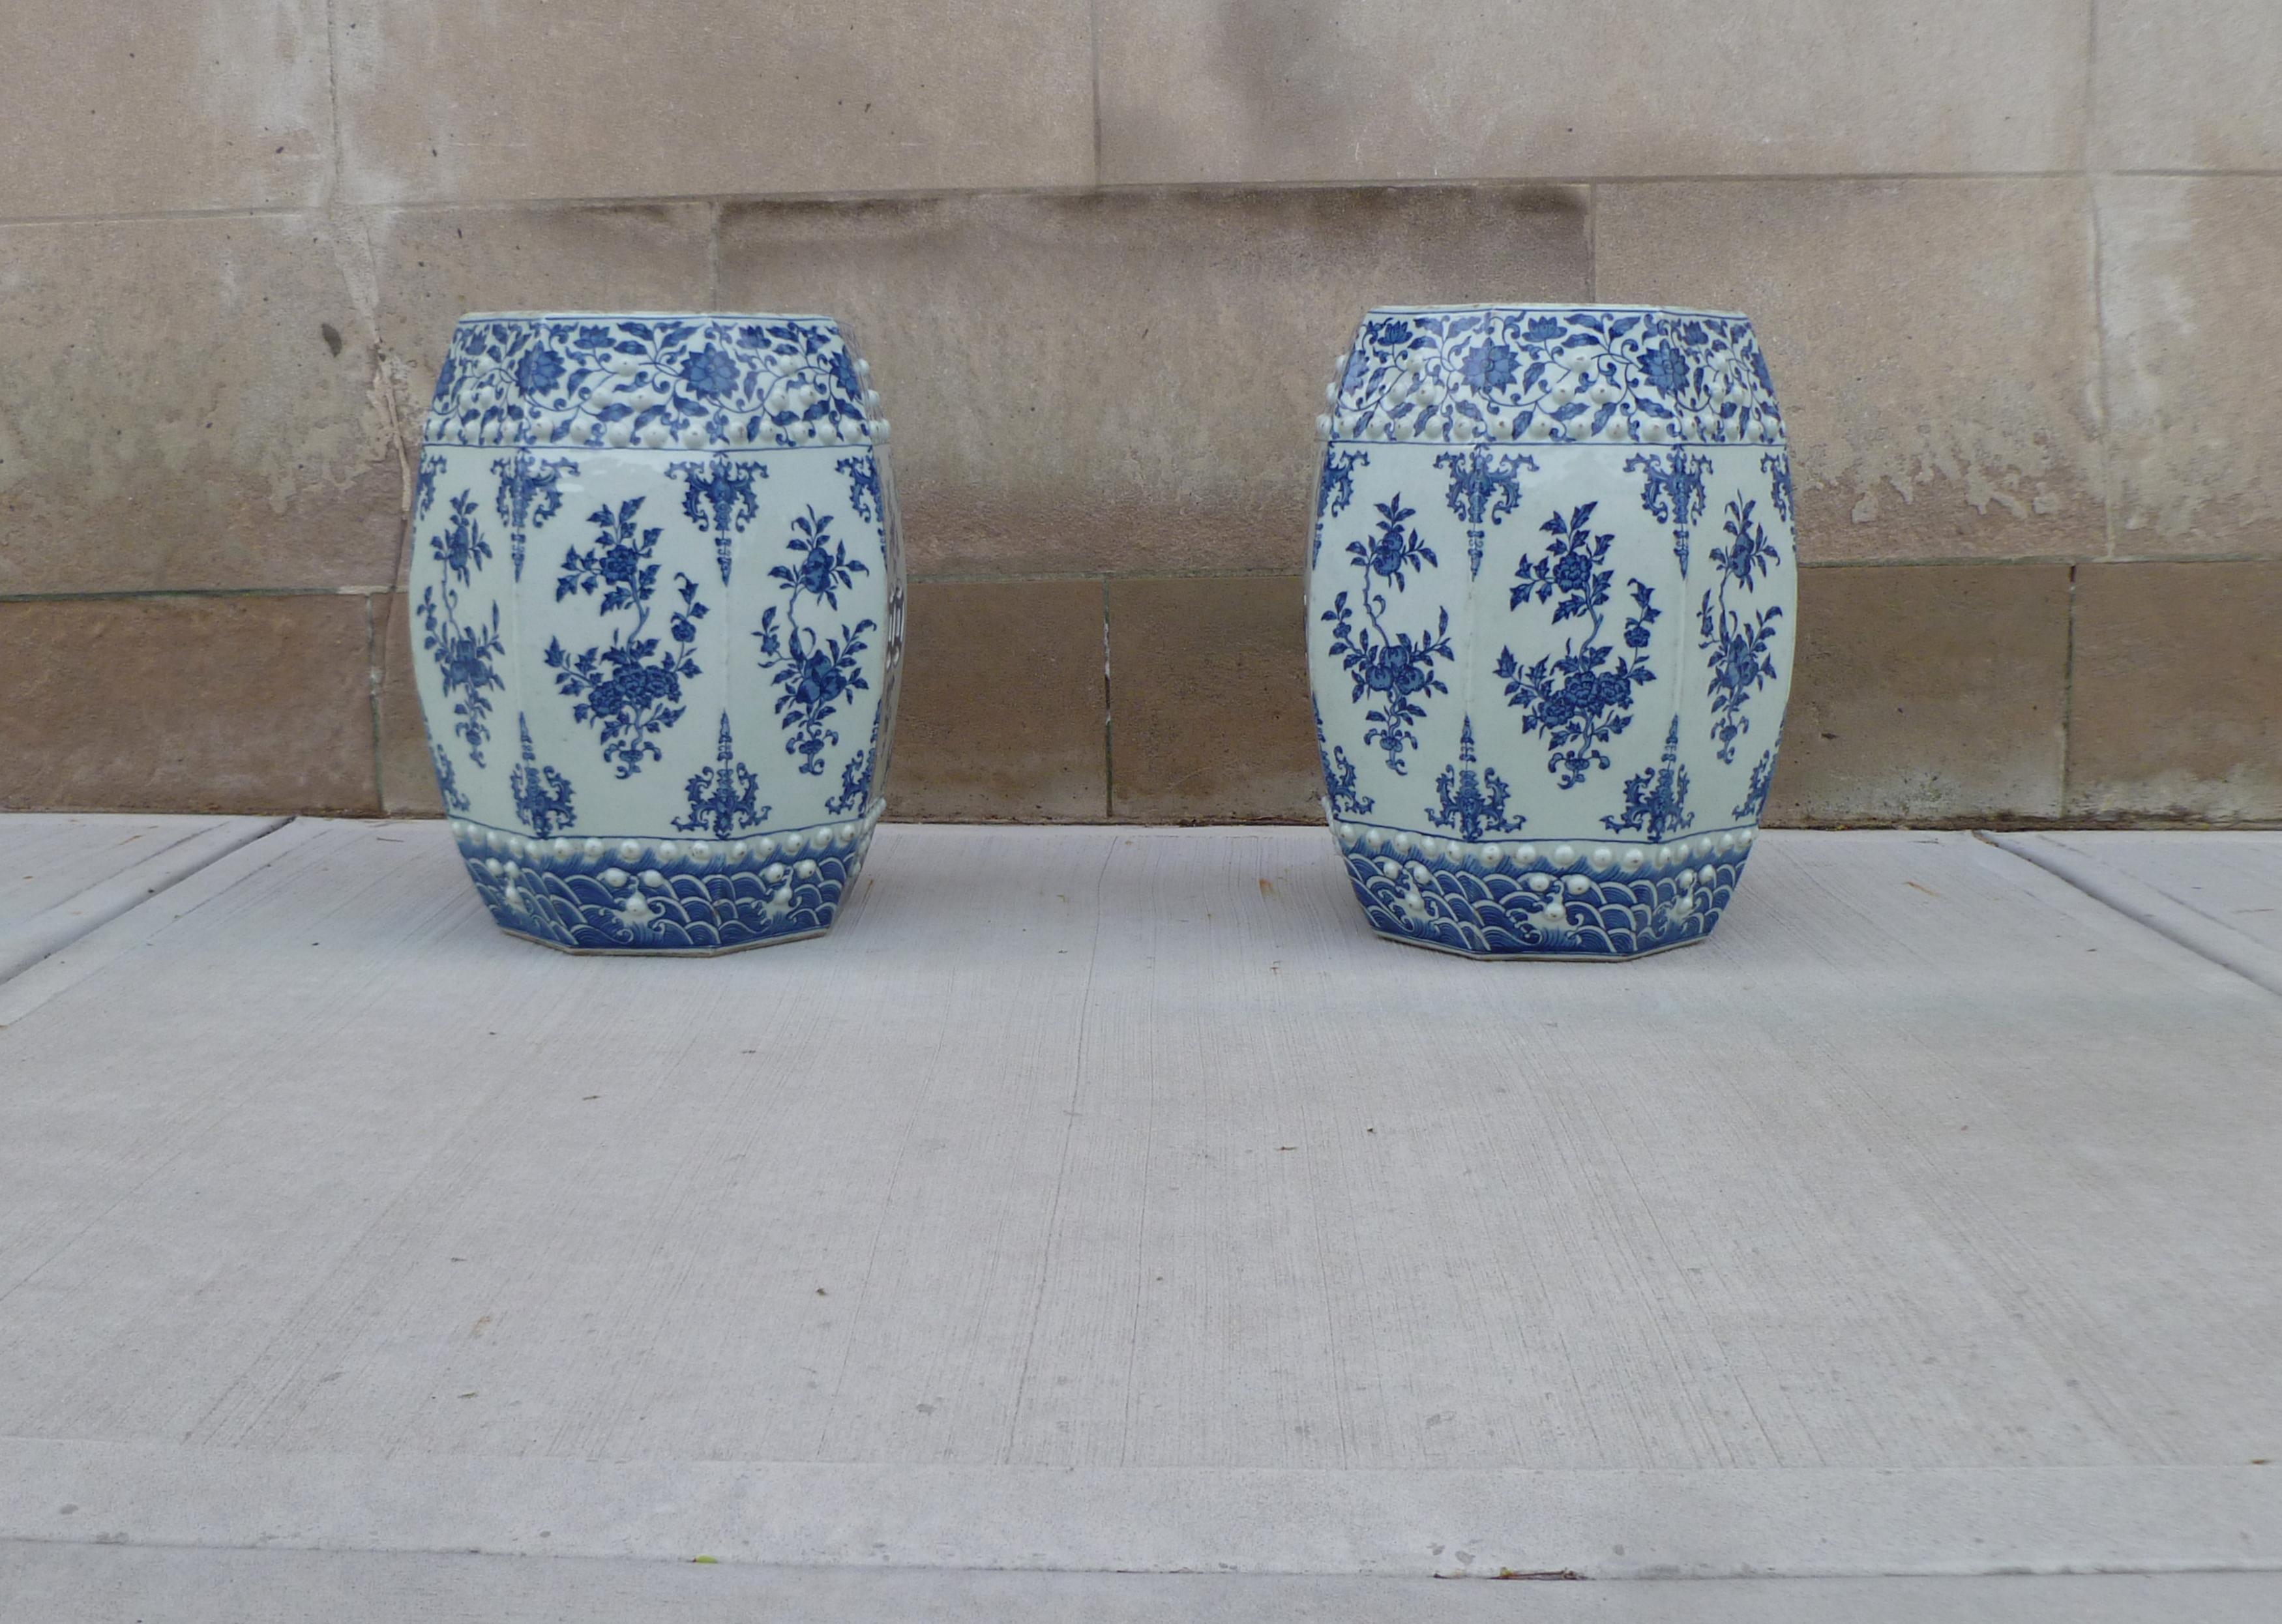 Pair of blue and white porcelain garden seats / end tables with floral motif. We carry fine quality furniture with elegant finished and has been appeared many times in 